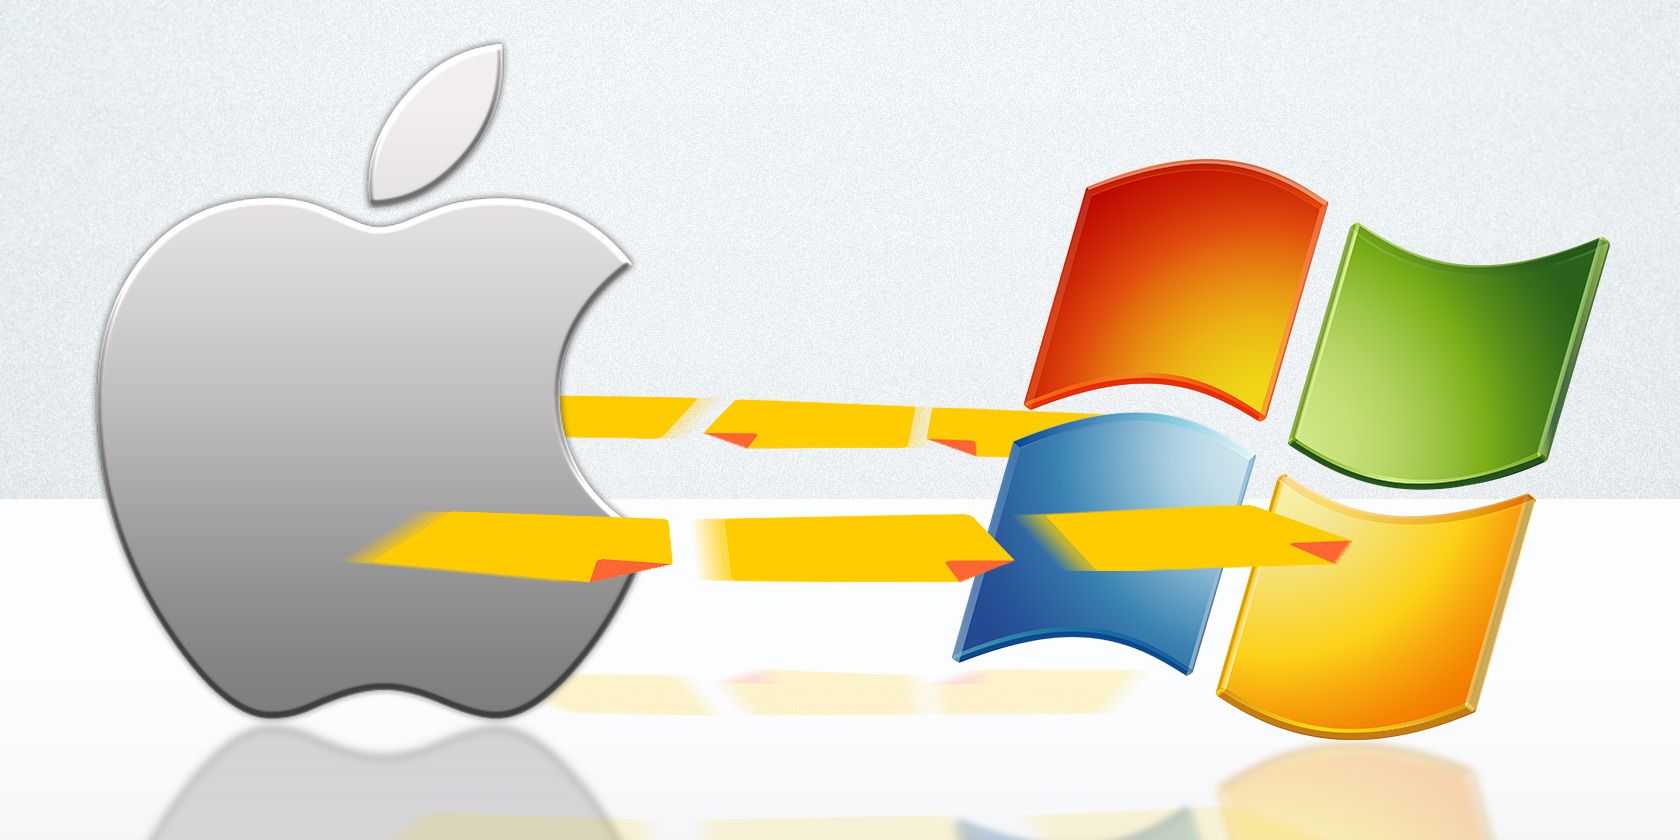 How to Easily Share Files Between Mac and Windows